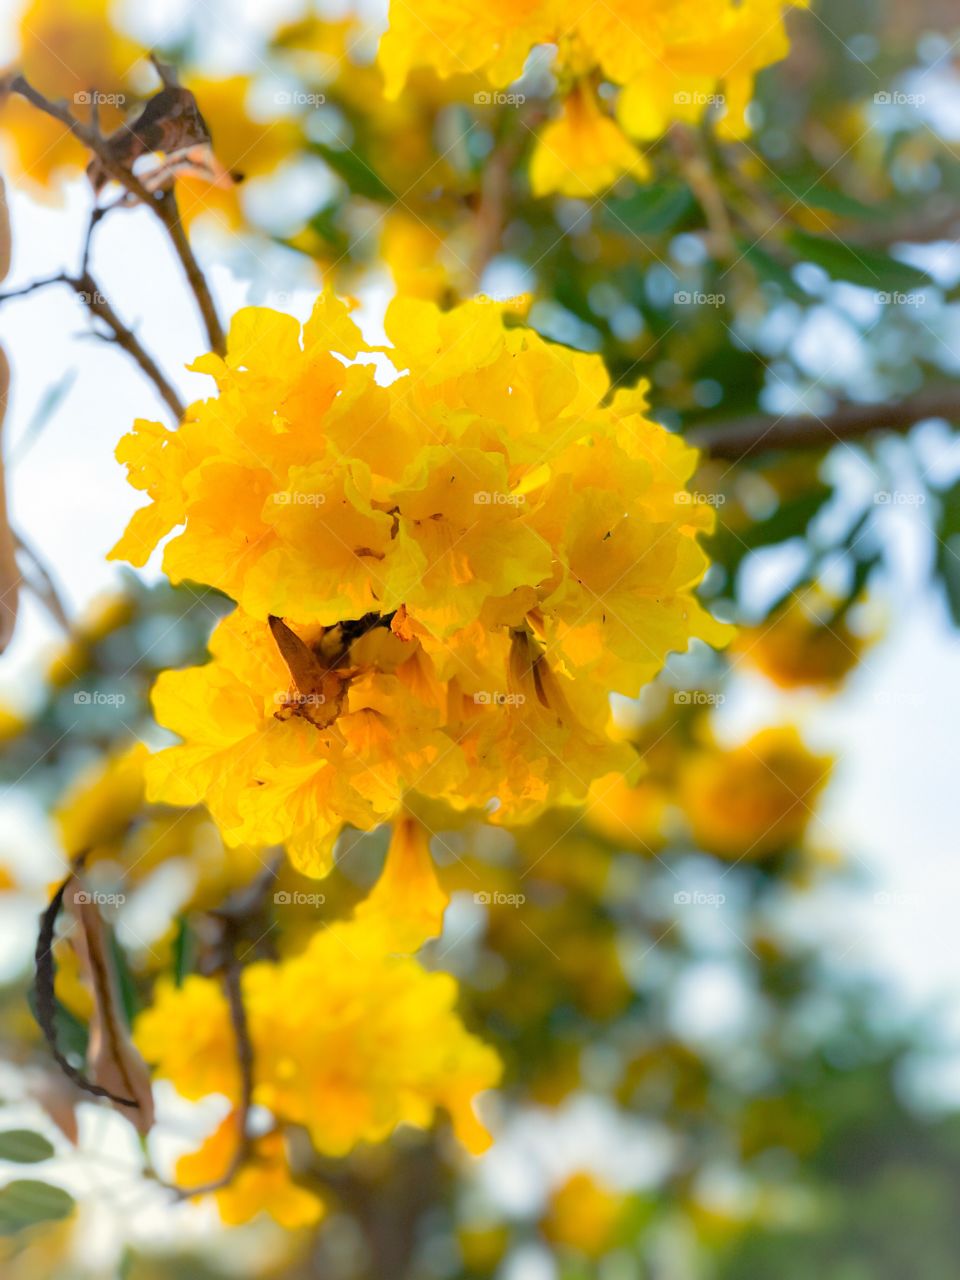 Tabebuia chrysantha, yellow flowers blossom in summer on blue sky background